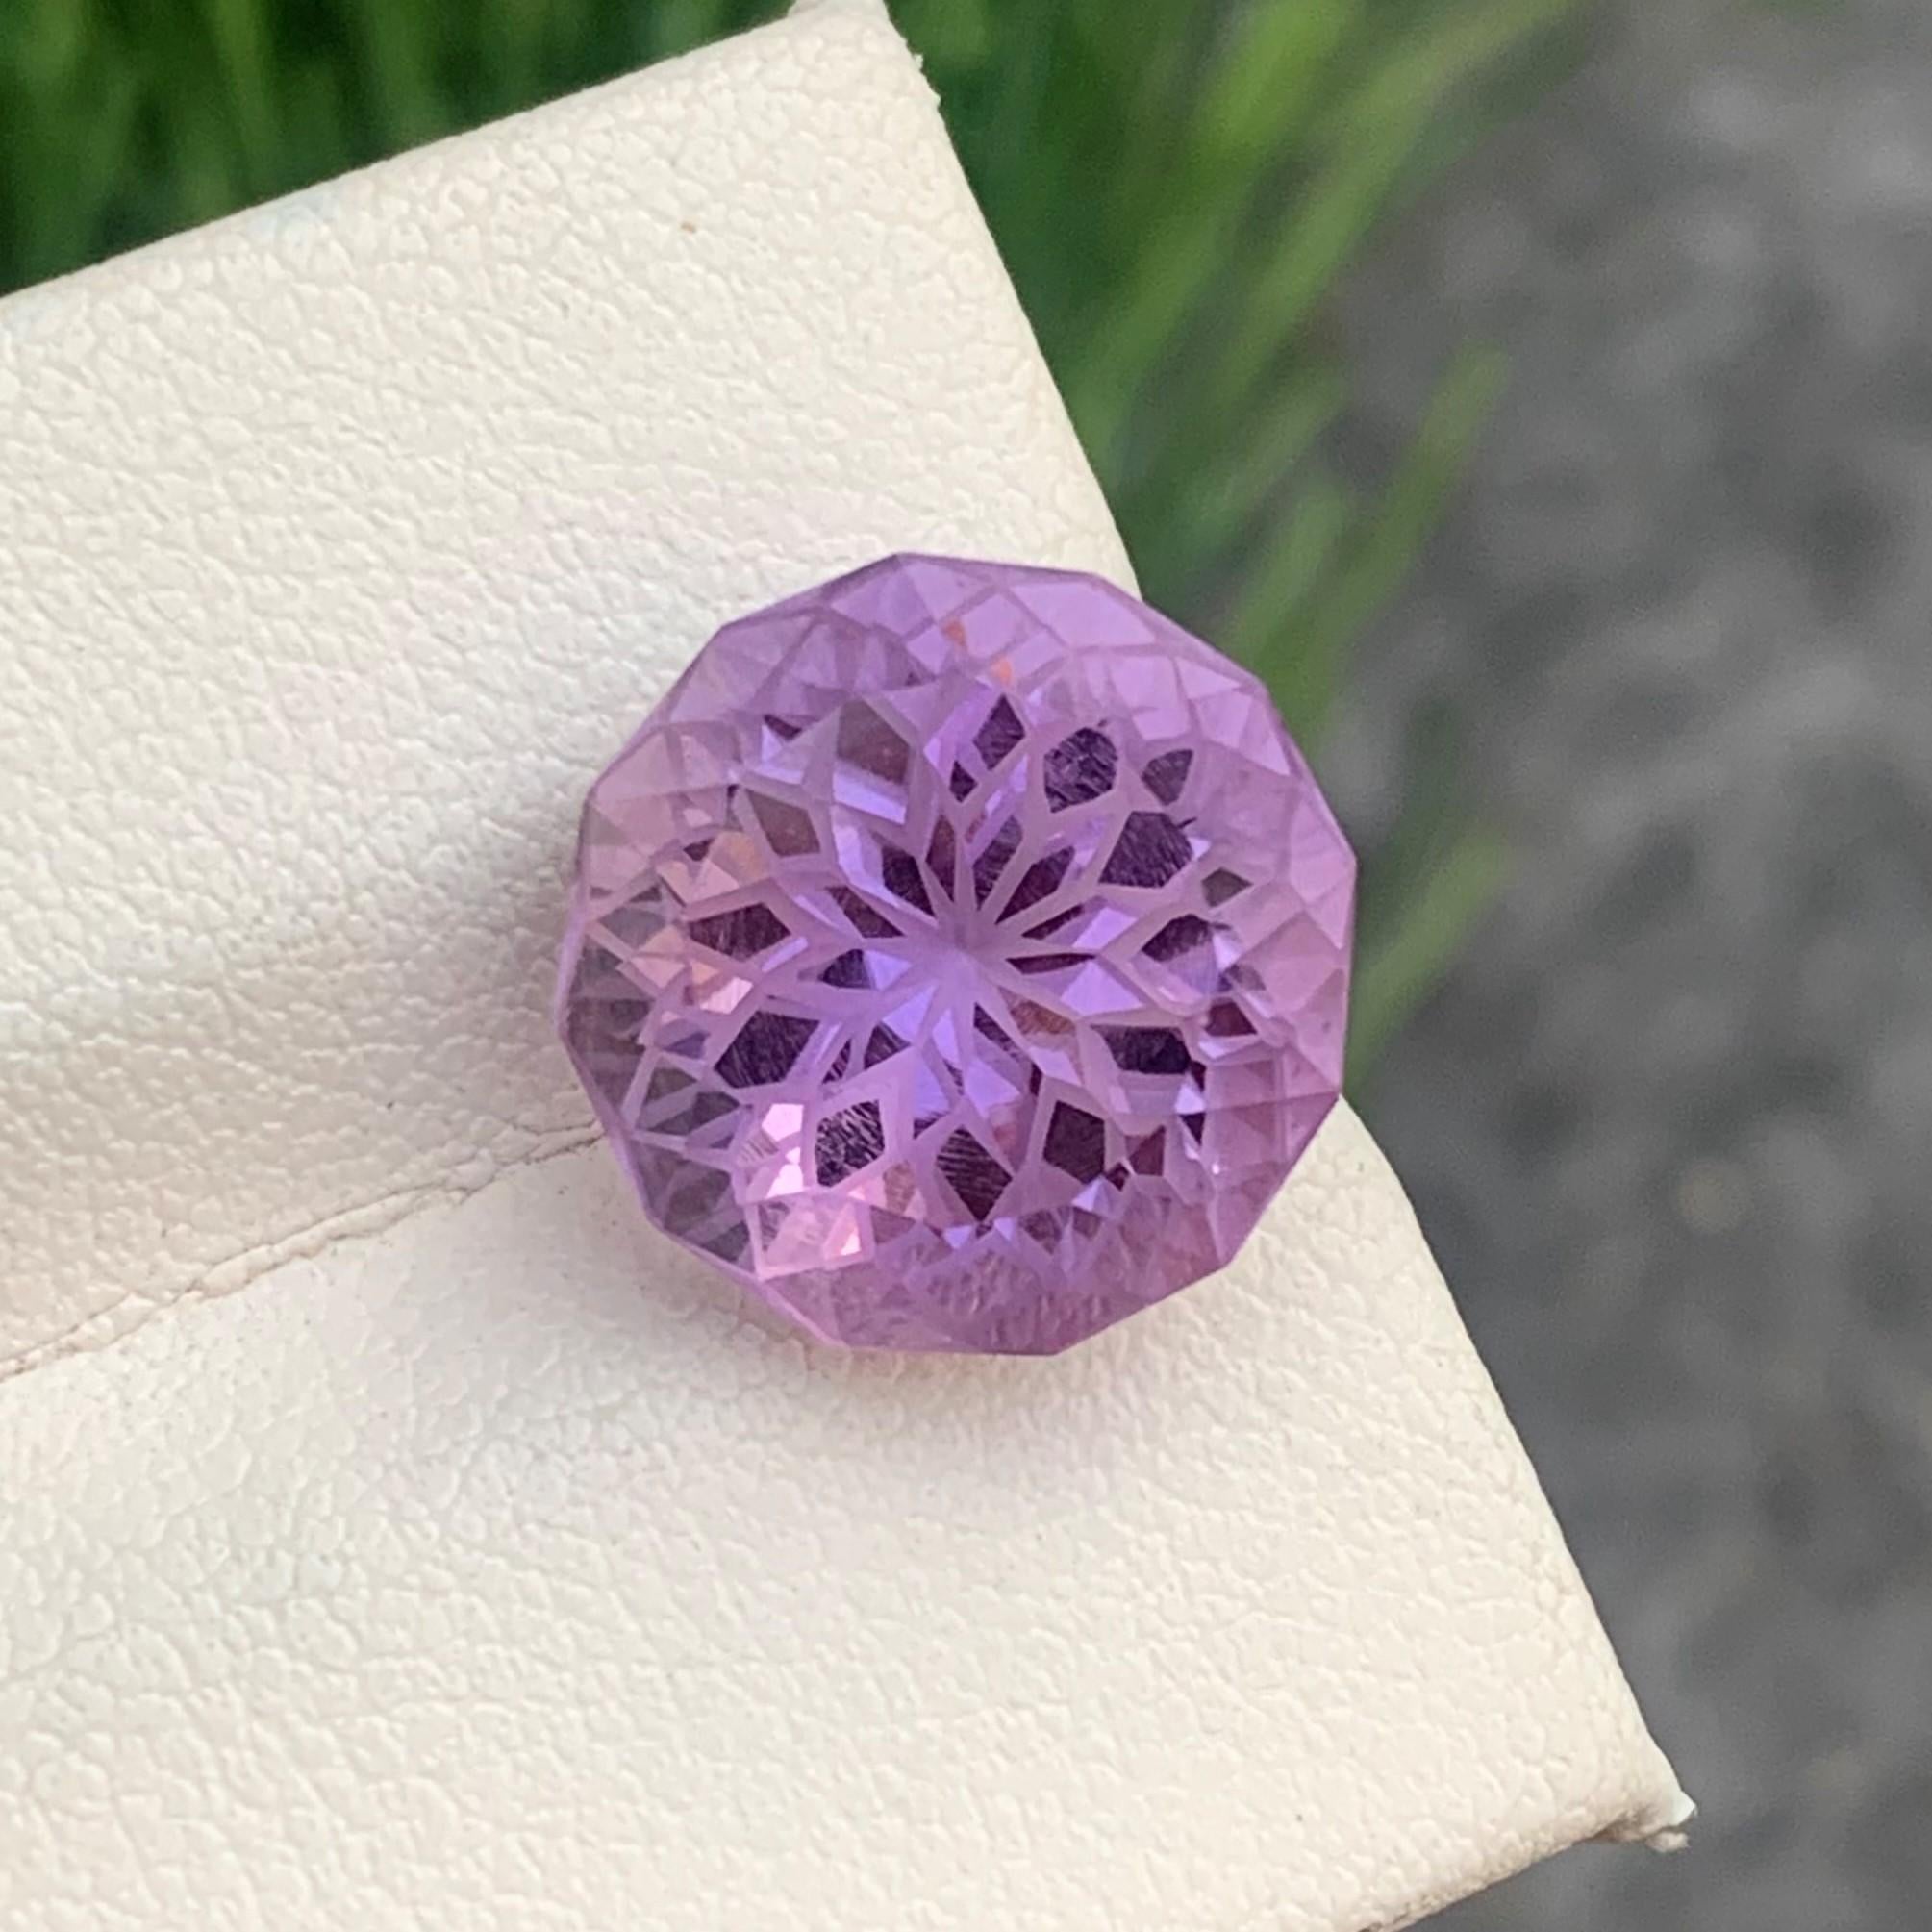 Gemstone Type : Amethyst
Weight : 8.50 Carats
Dimensions : 13.1x12.9x9.8 Mm
Clarity : Eye Clean(SI)
Origin : Brazil
Color: Purple
Shape: Round
Certificate: On Demand
Month: February
Purported amethyst powers for healing
enhancing the immune